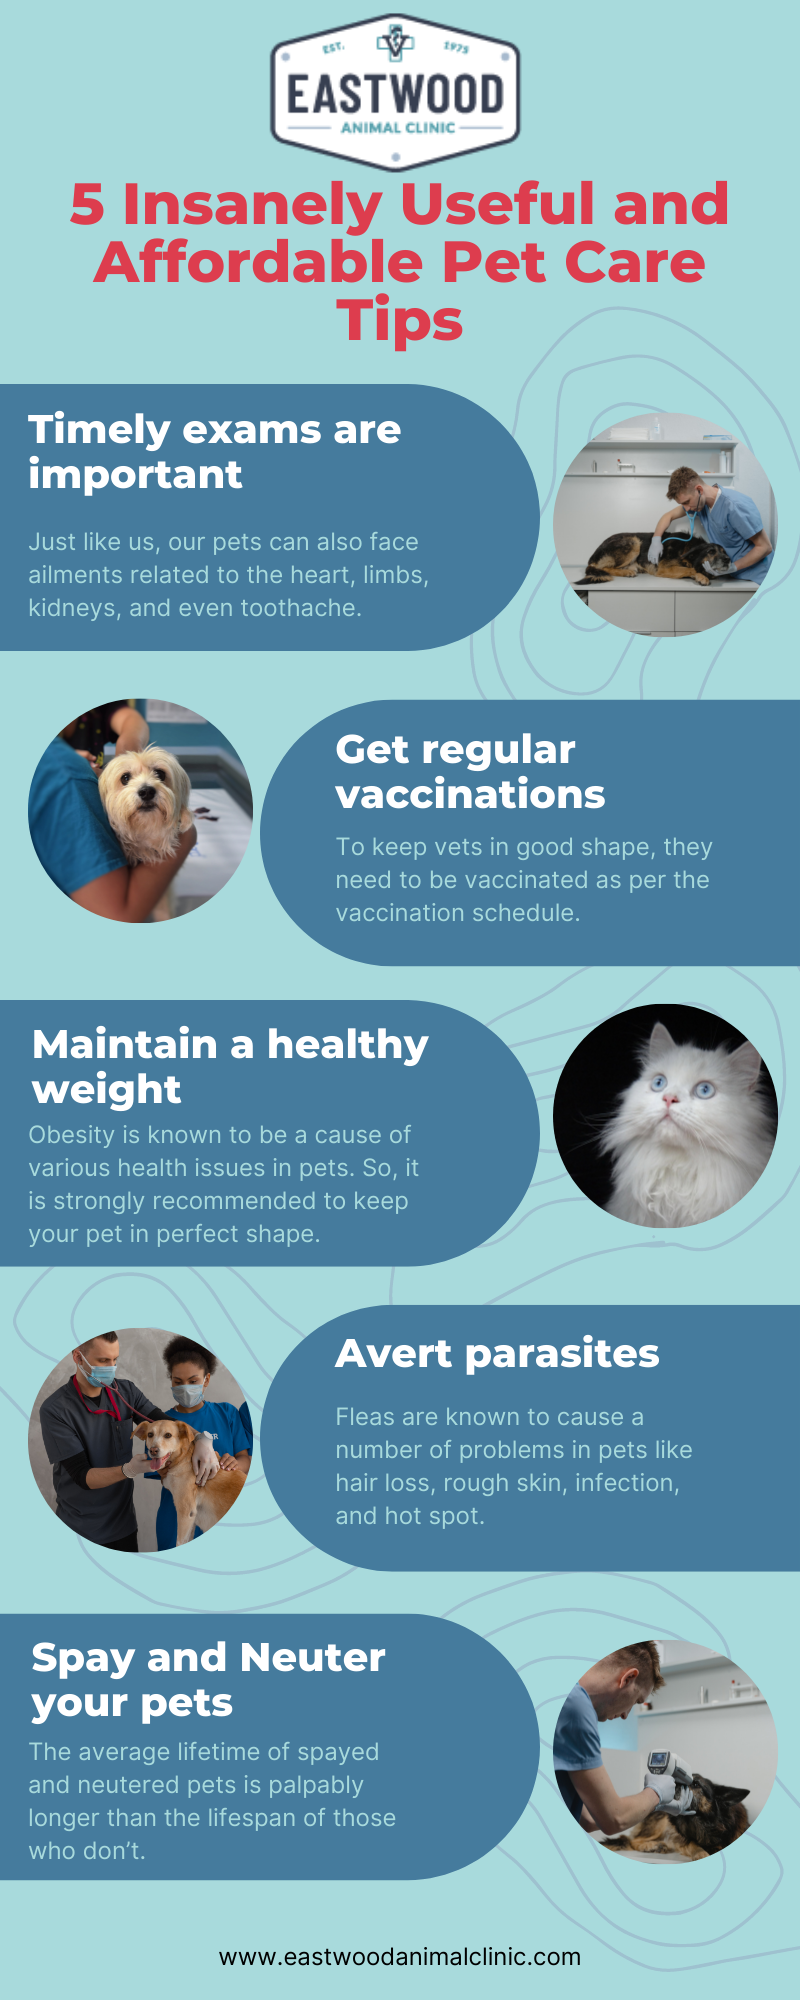 5 Insanely Useful and Affordable Pet Care Tips